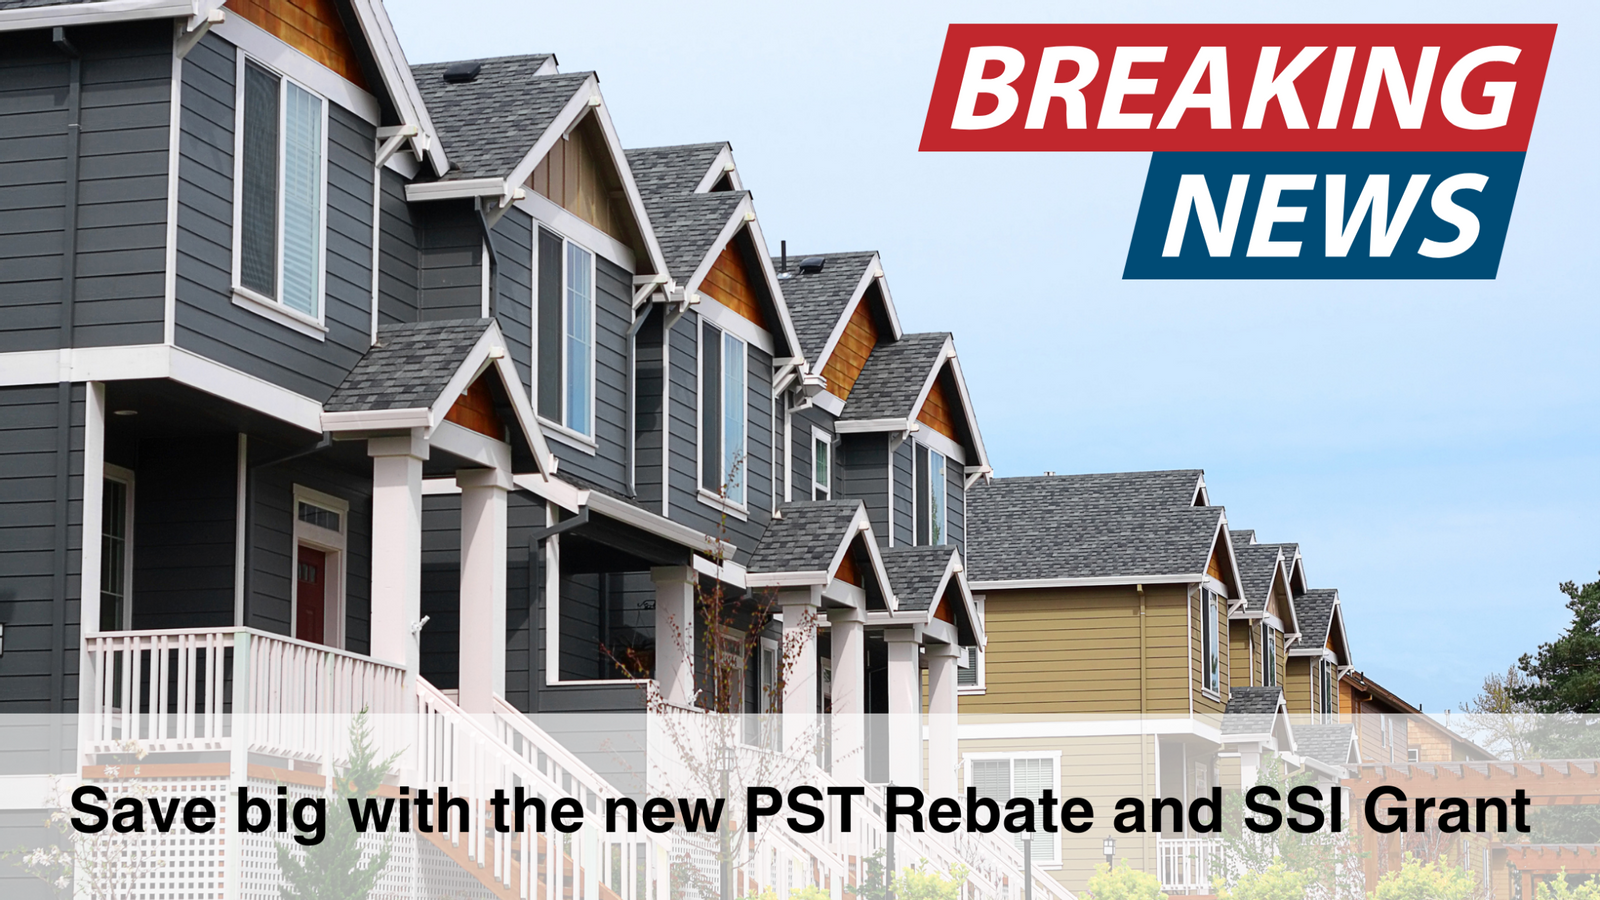 Exciting News: Learn About New Home Savings with the PST Rebate and SSI Grant!